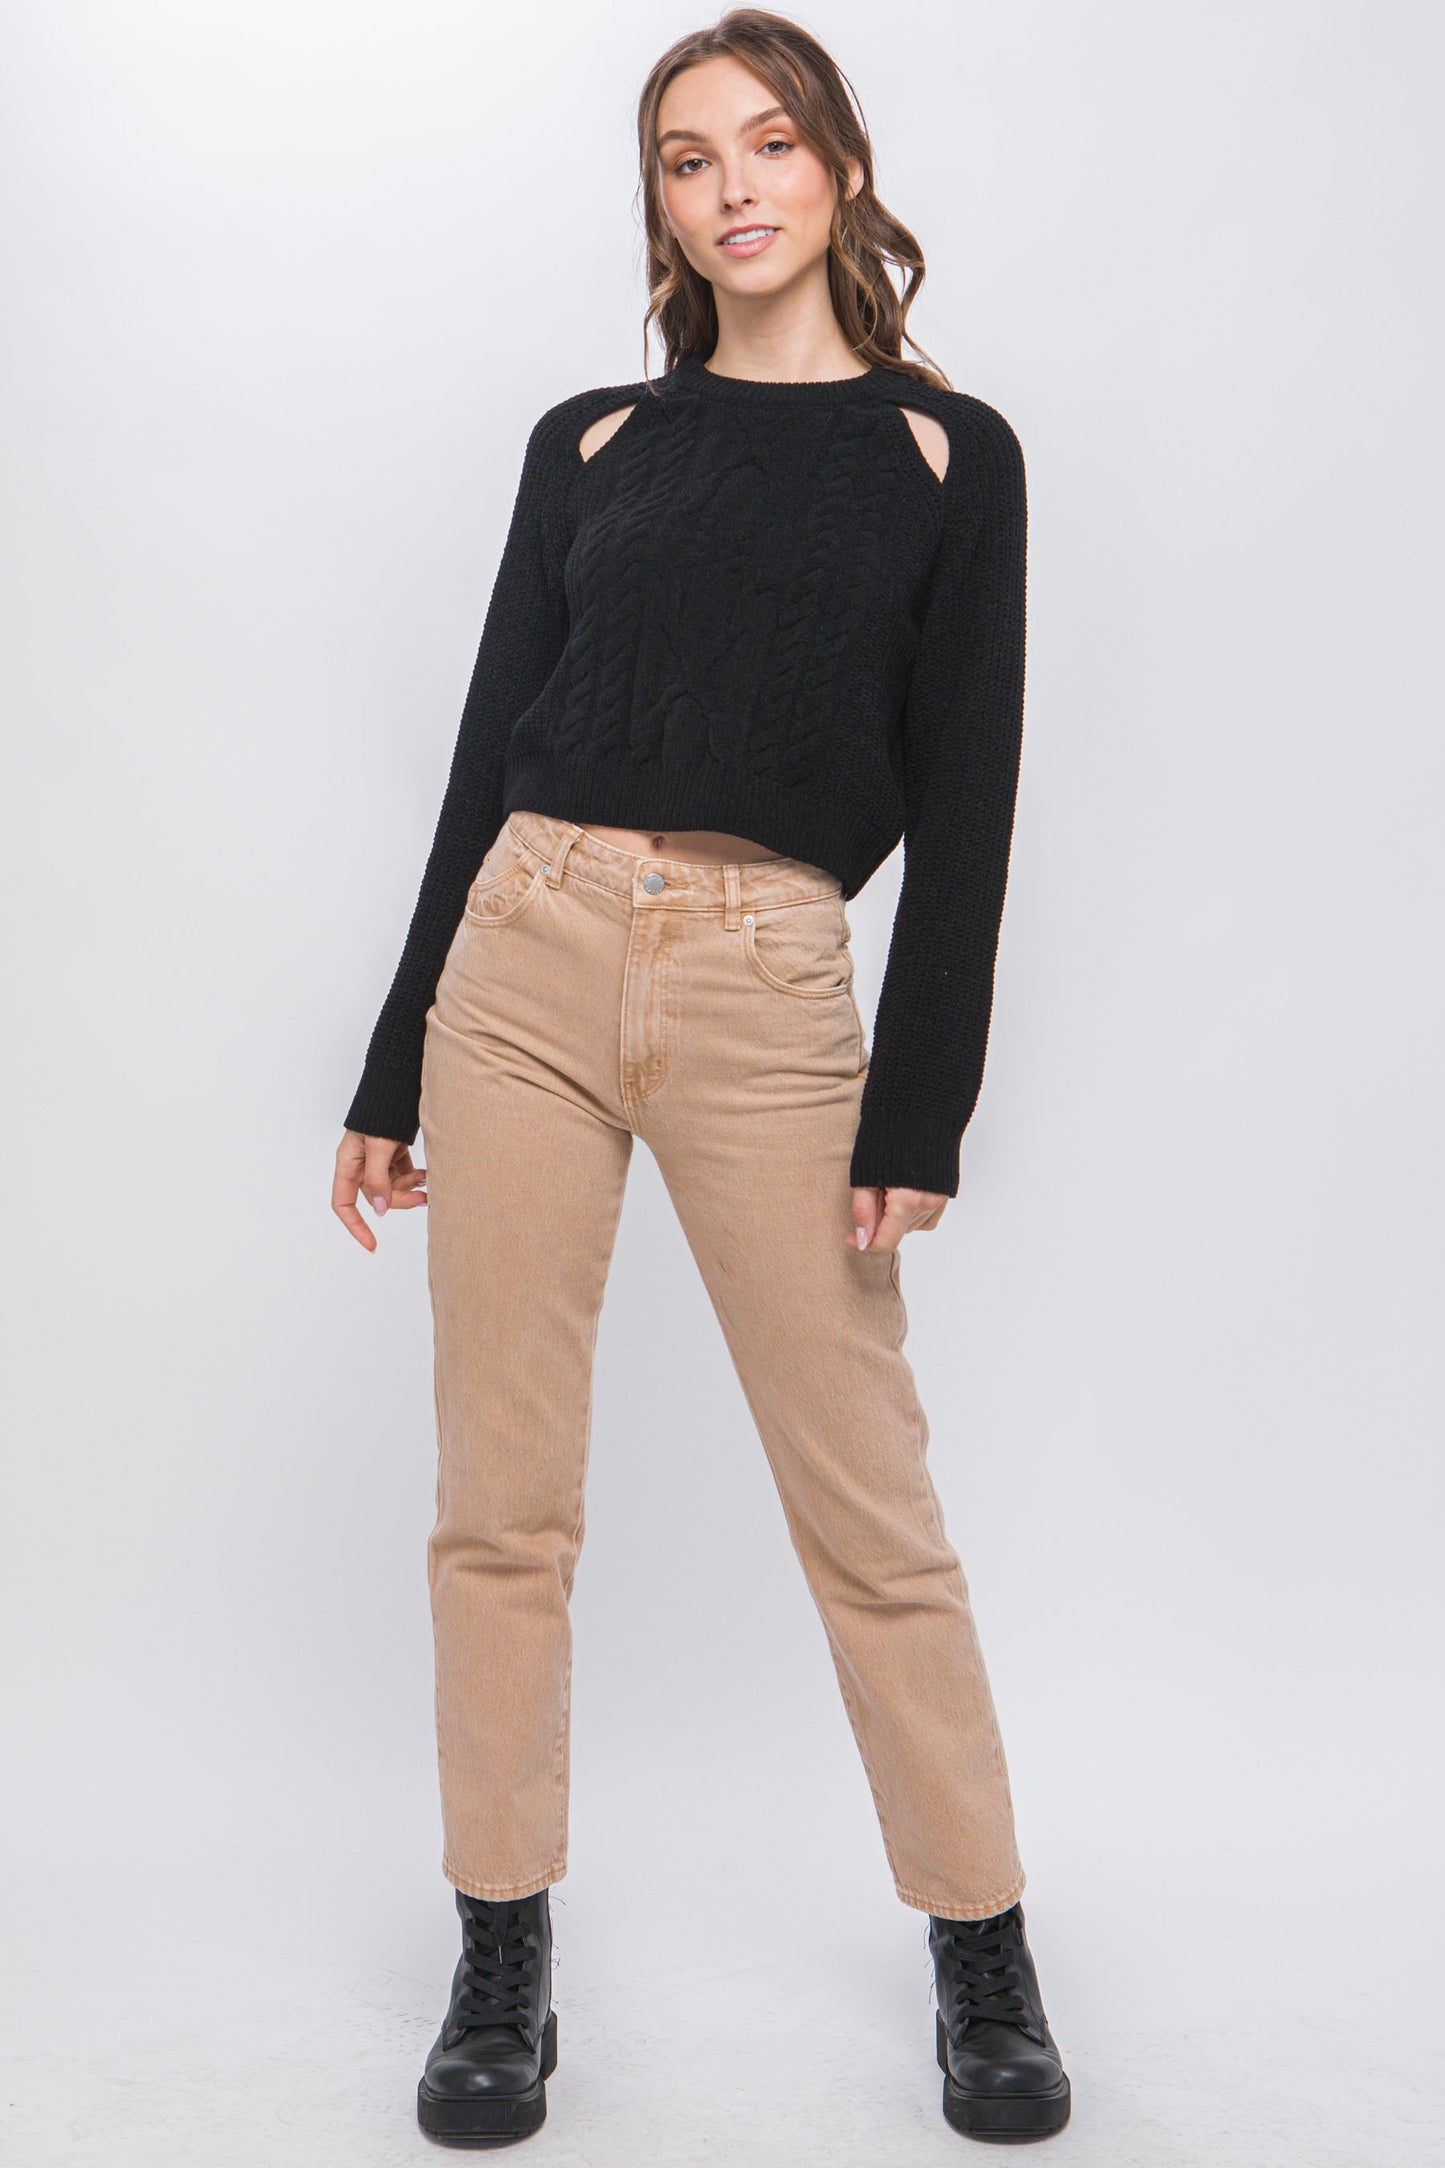 Knit Pullover Sweater With Cold Shoulder Detail - House of Binx 